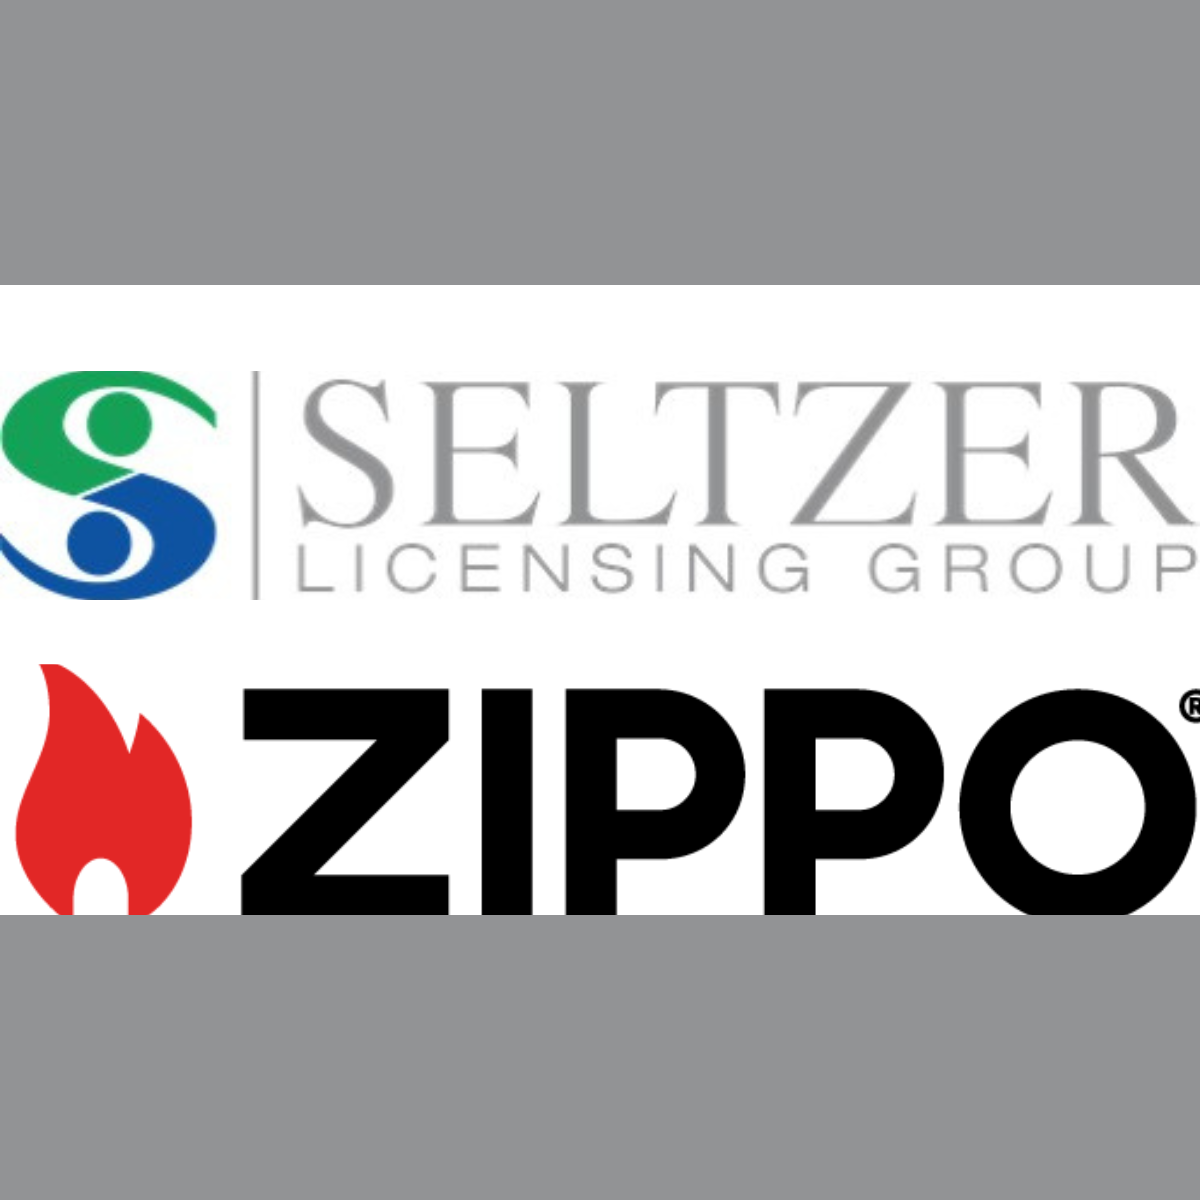 Seltzer Licensing Group Signs Deal to Represent Zippo Brand